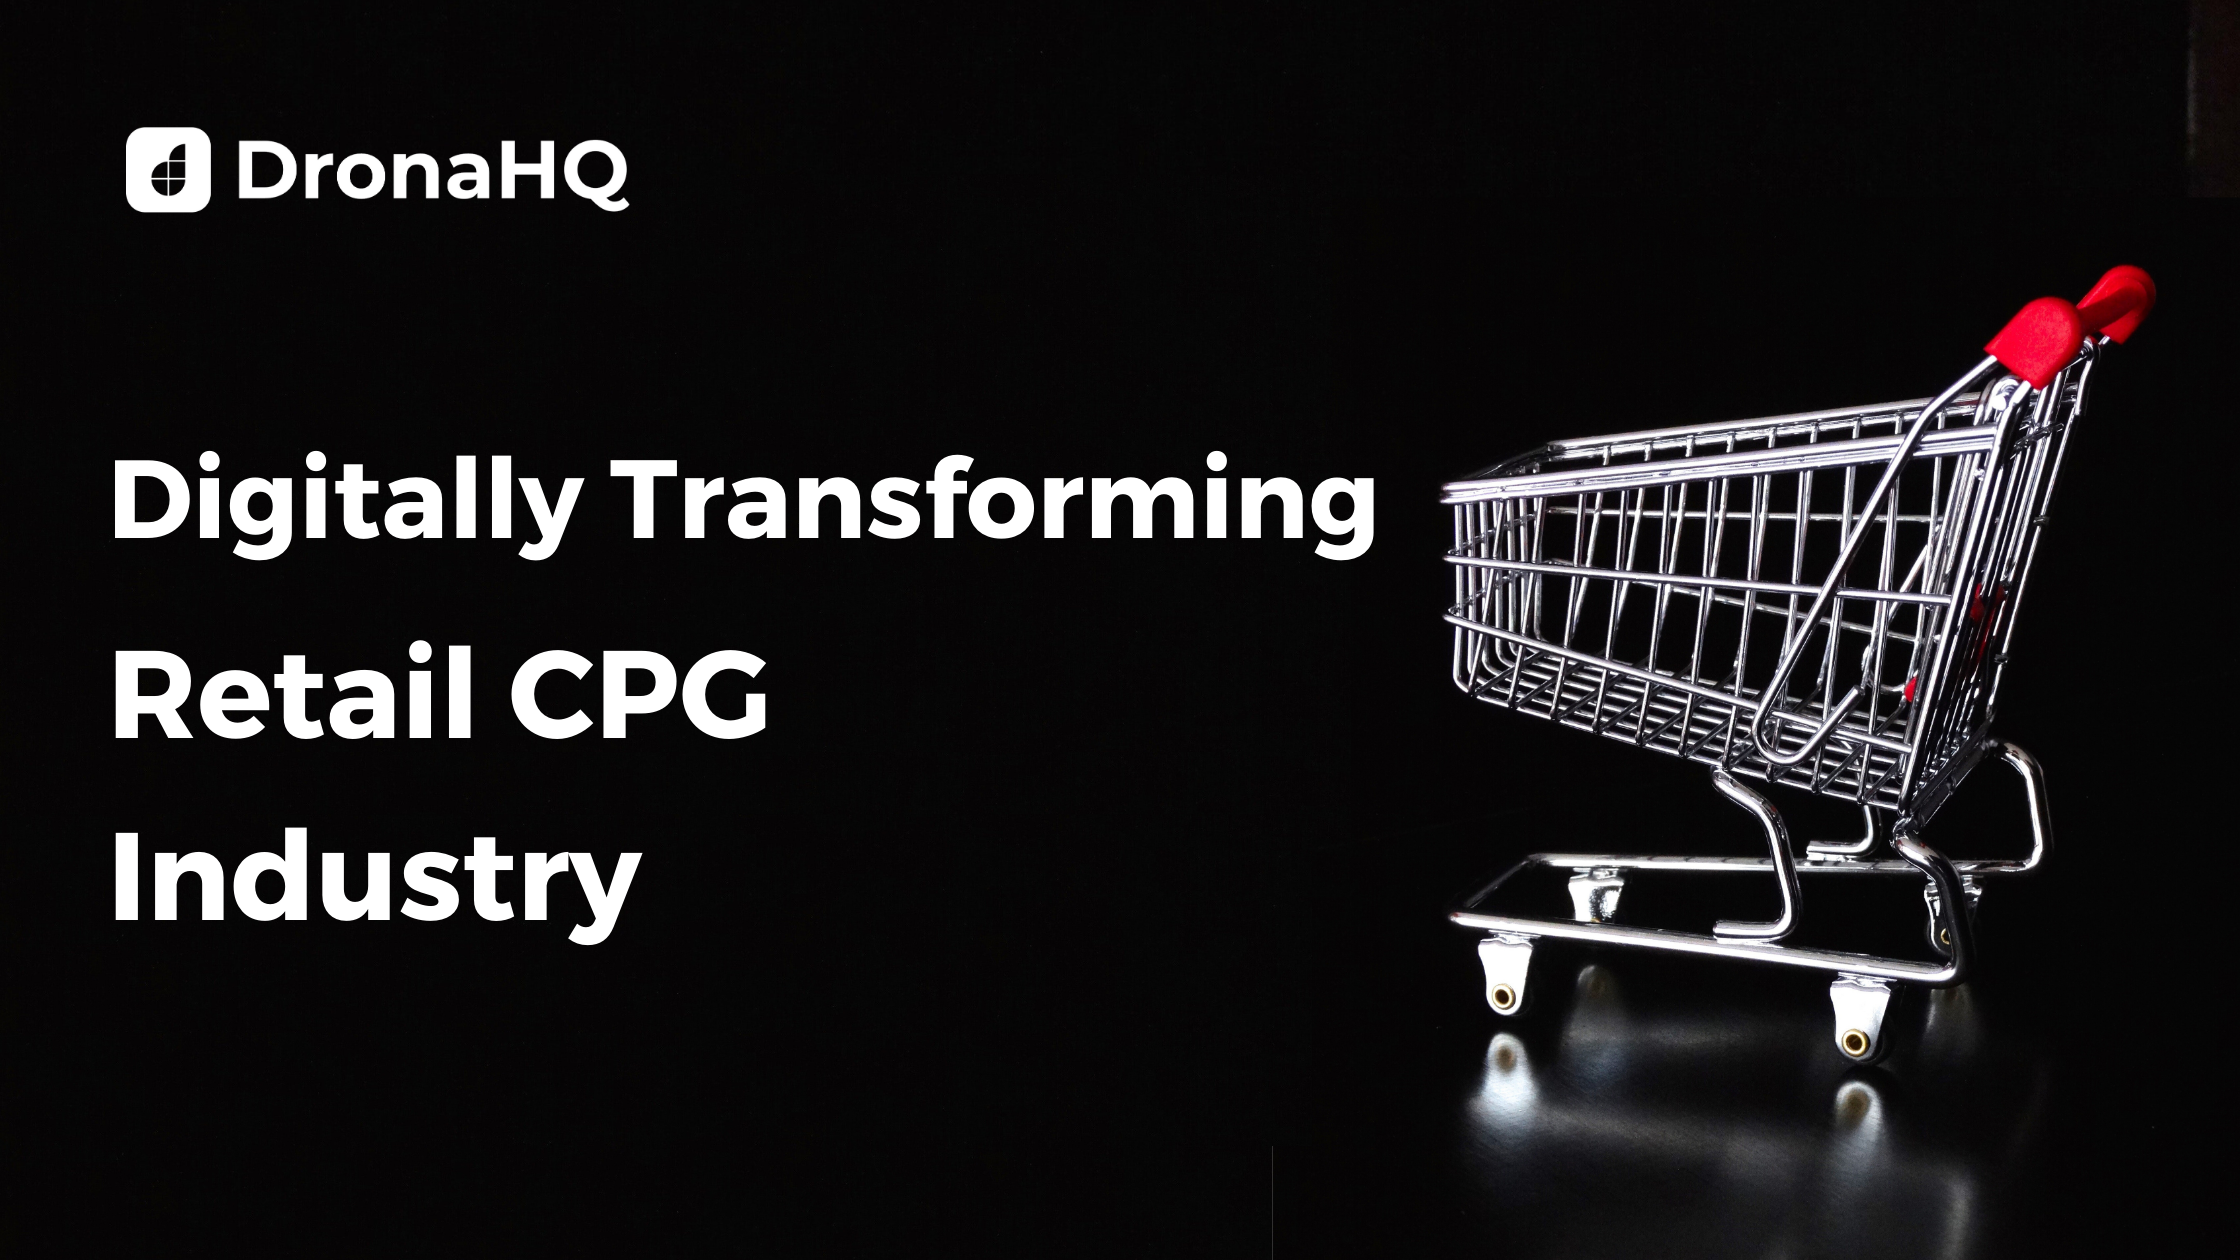 7 Must Have Apps for the Retail CPG Industry